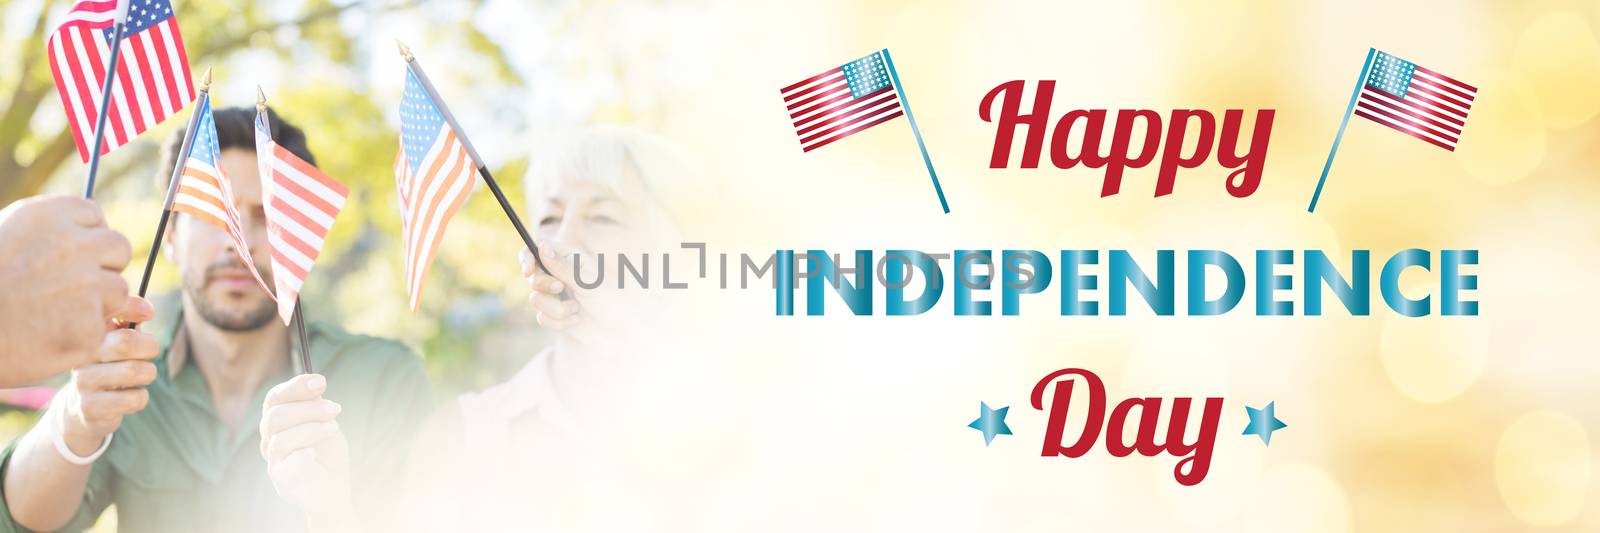 Happy independence day text over white background against happy family having a picnic